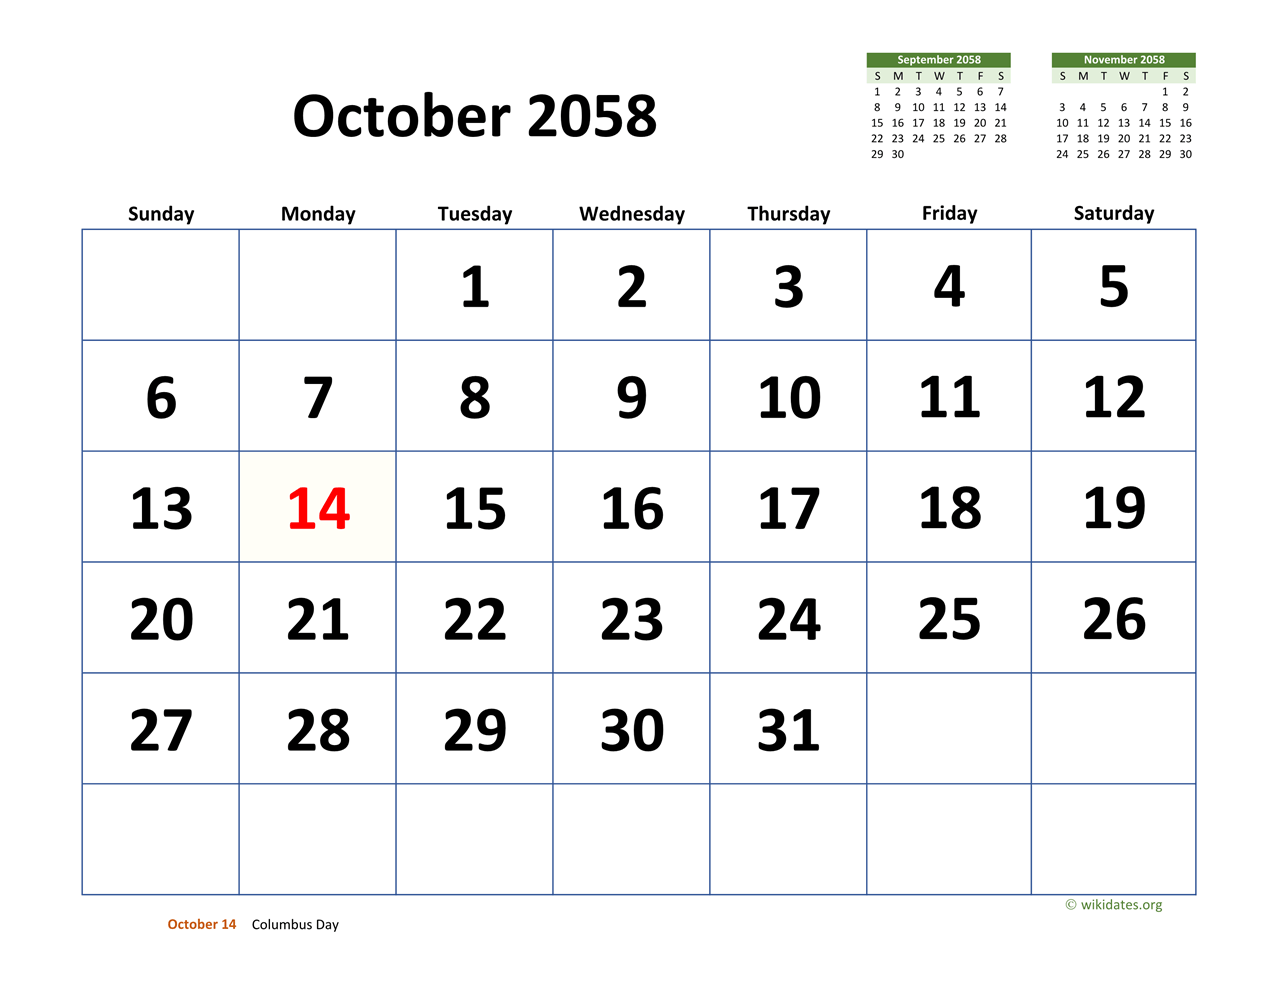 October 2058 Calendar with Extralarge Dates